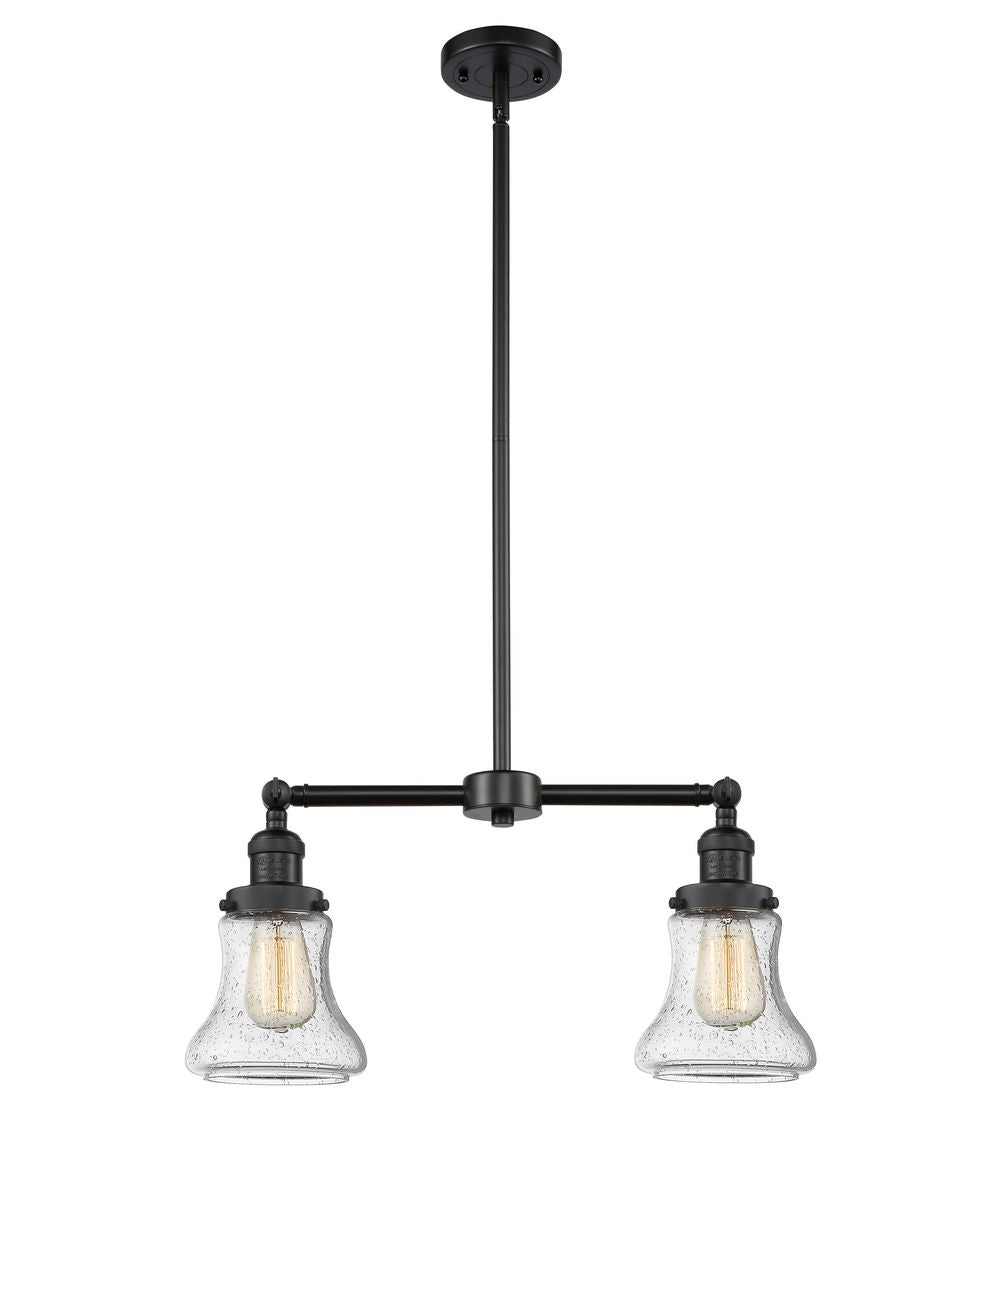 209-BK-G194 2-Light 21" Matte Black Island Light - Seedy Bellmont Glass - LED Bulb - Dimmensions: 21 x 5 x 10<br>Minimum Height : 21.375<br>Maximum Height : 45.375 - Sloped Ceiling Compatible: Yes